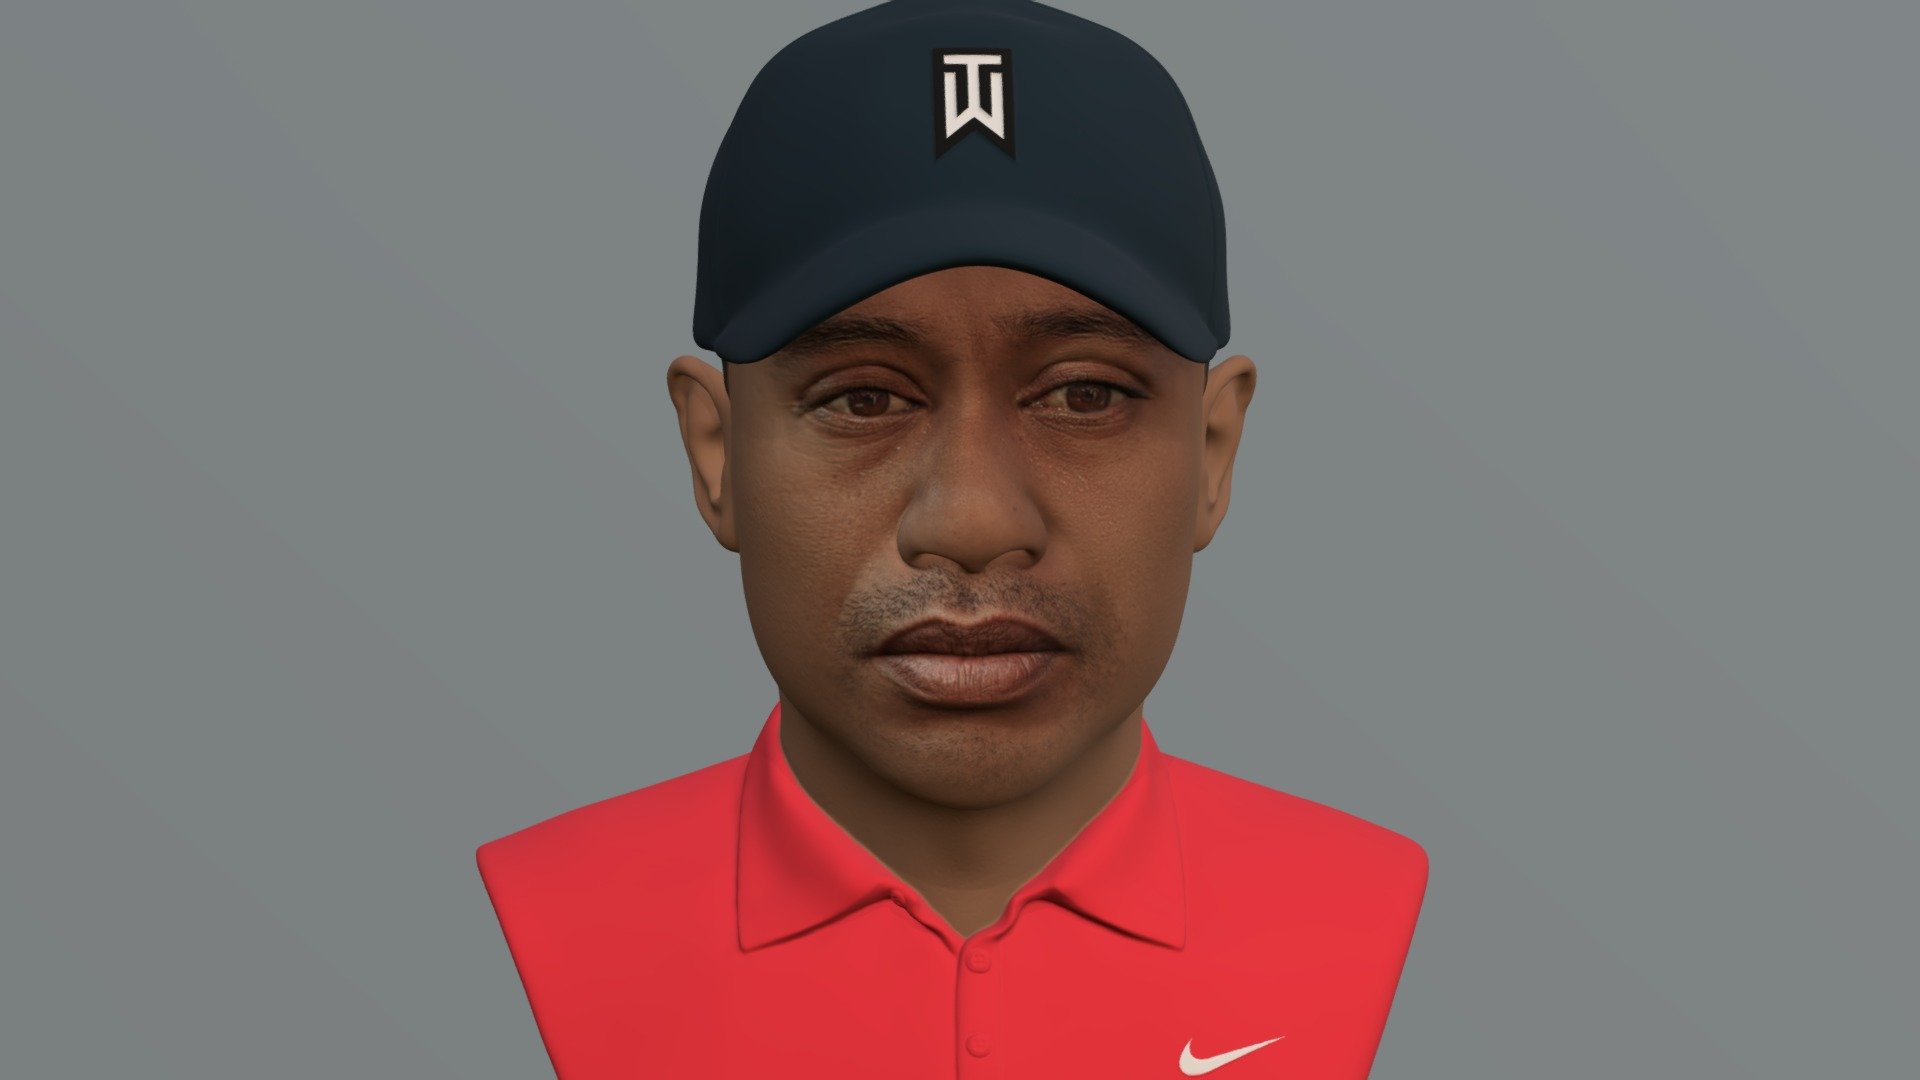 Tiger Woods bust for full color 3D printing